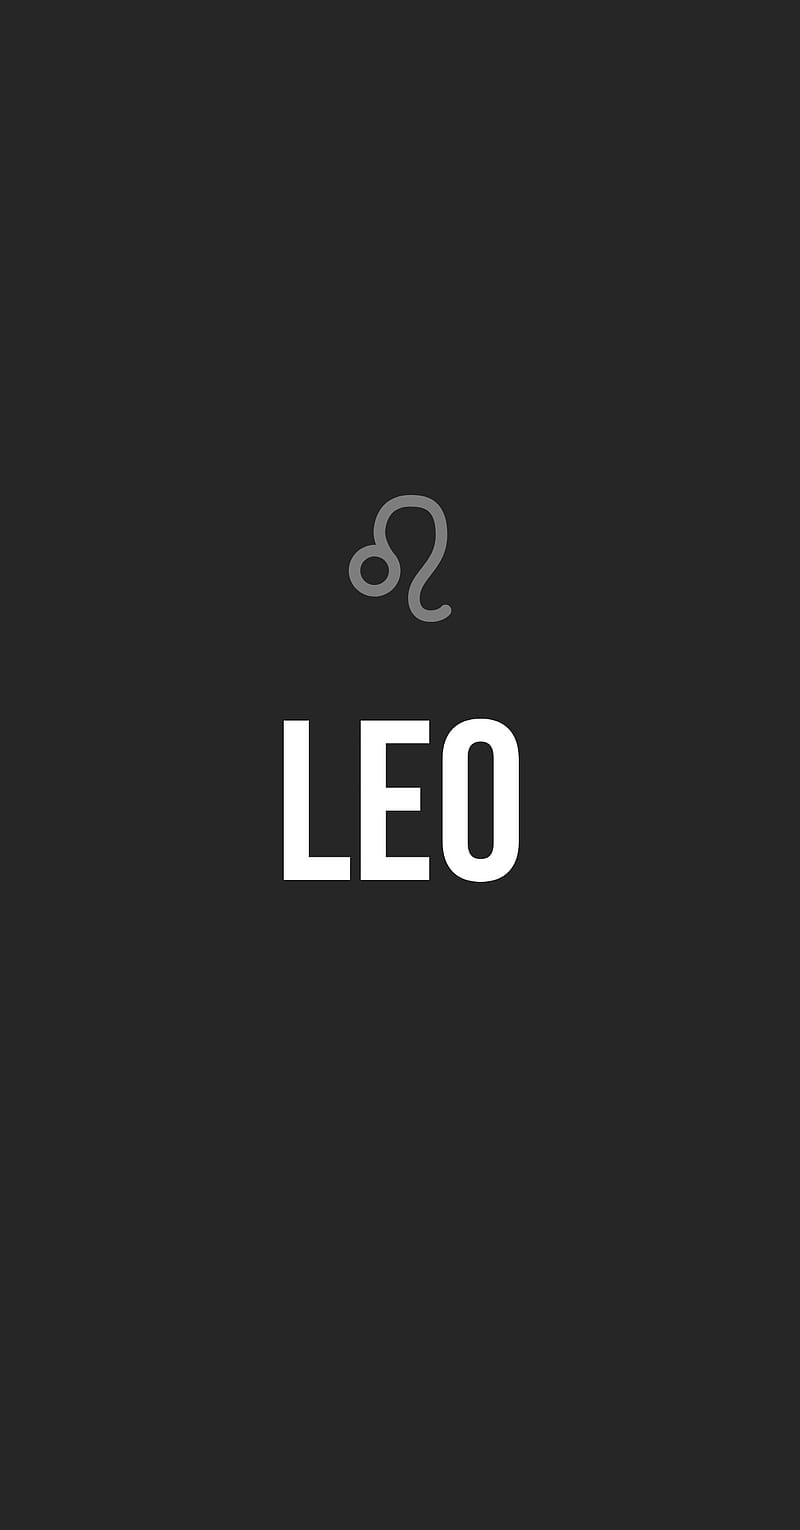 Black background with the word Leo in white. - Leo